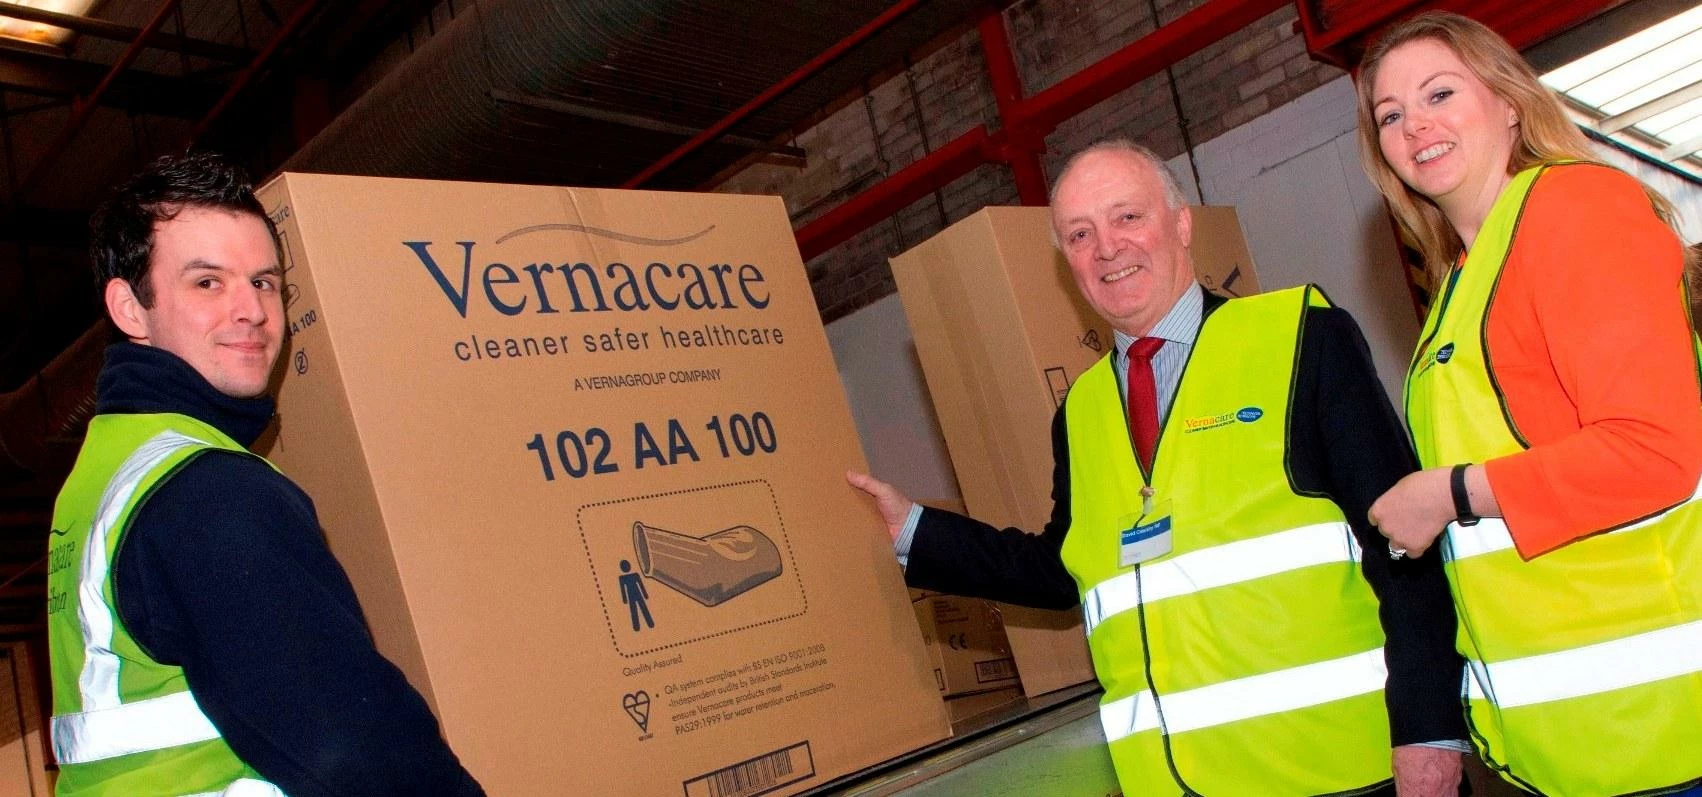 Pictured (l-r) Joe Fisher of Vernacare, David Crausby MP and Emma Sheldon Marketing Director oversee